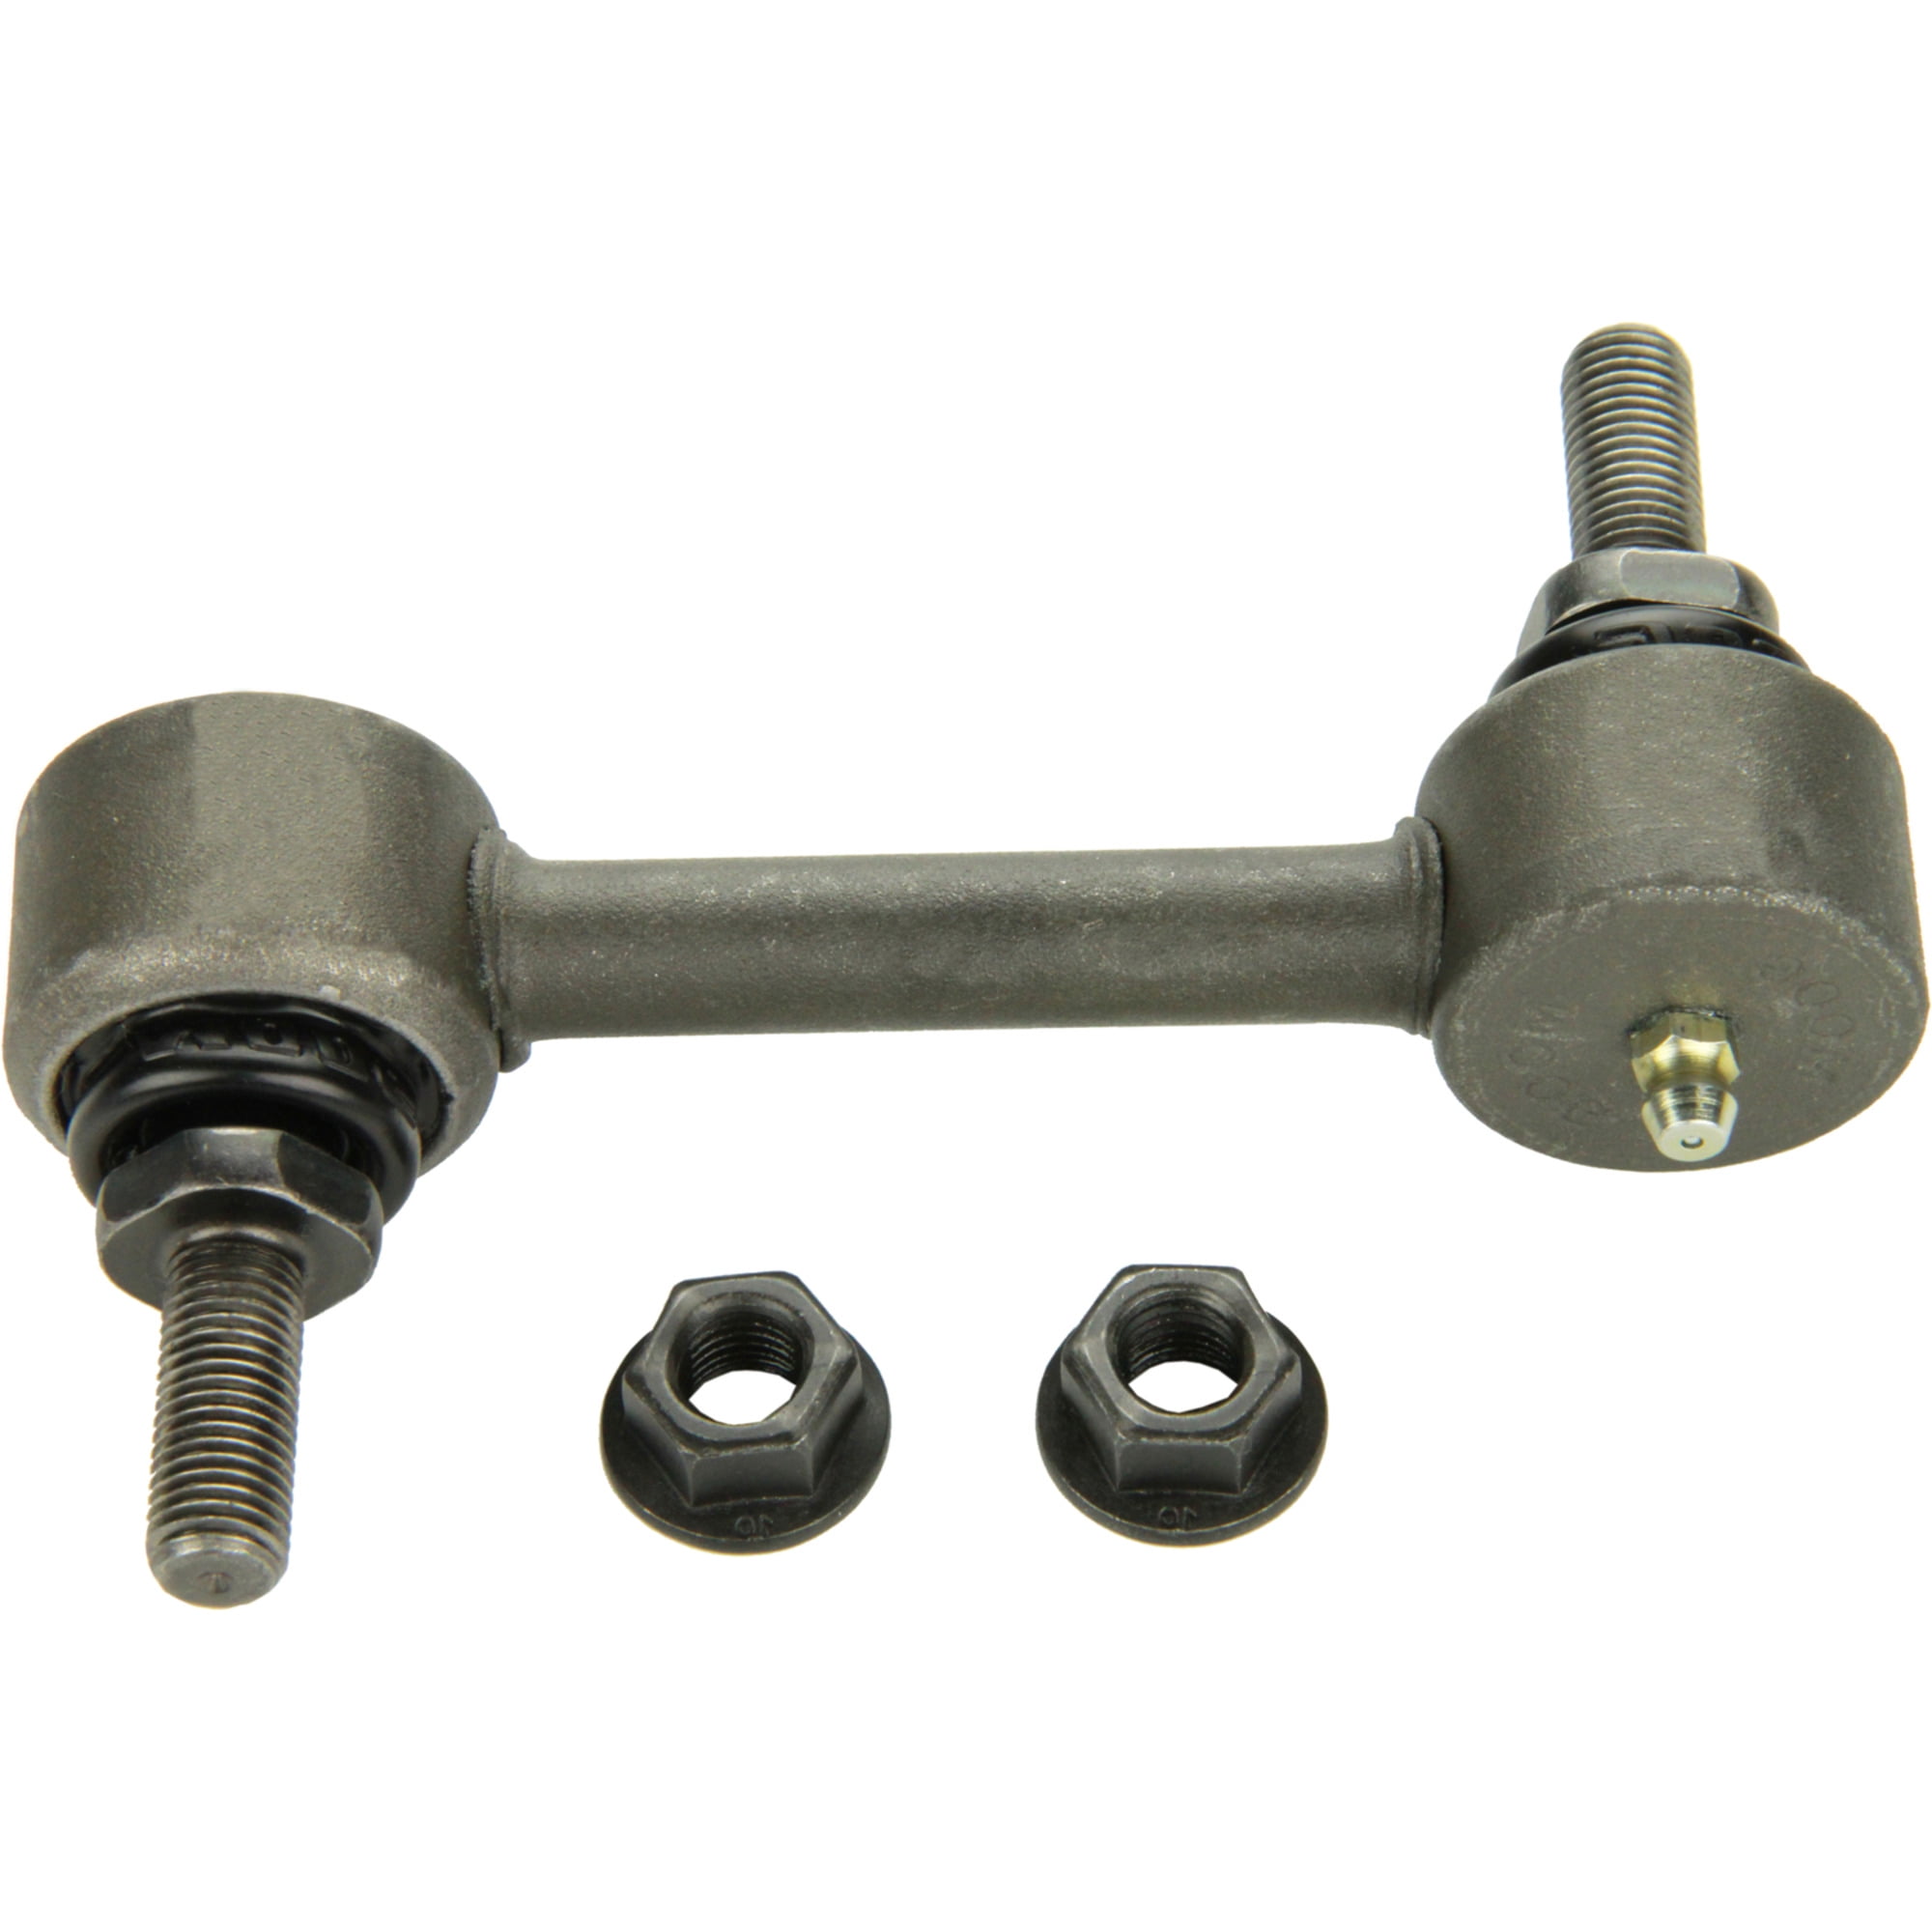 Moog Suspension Kit Ball Joint Tie Rod End Sway Bar For Toyota Tundra 2000-2002 